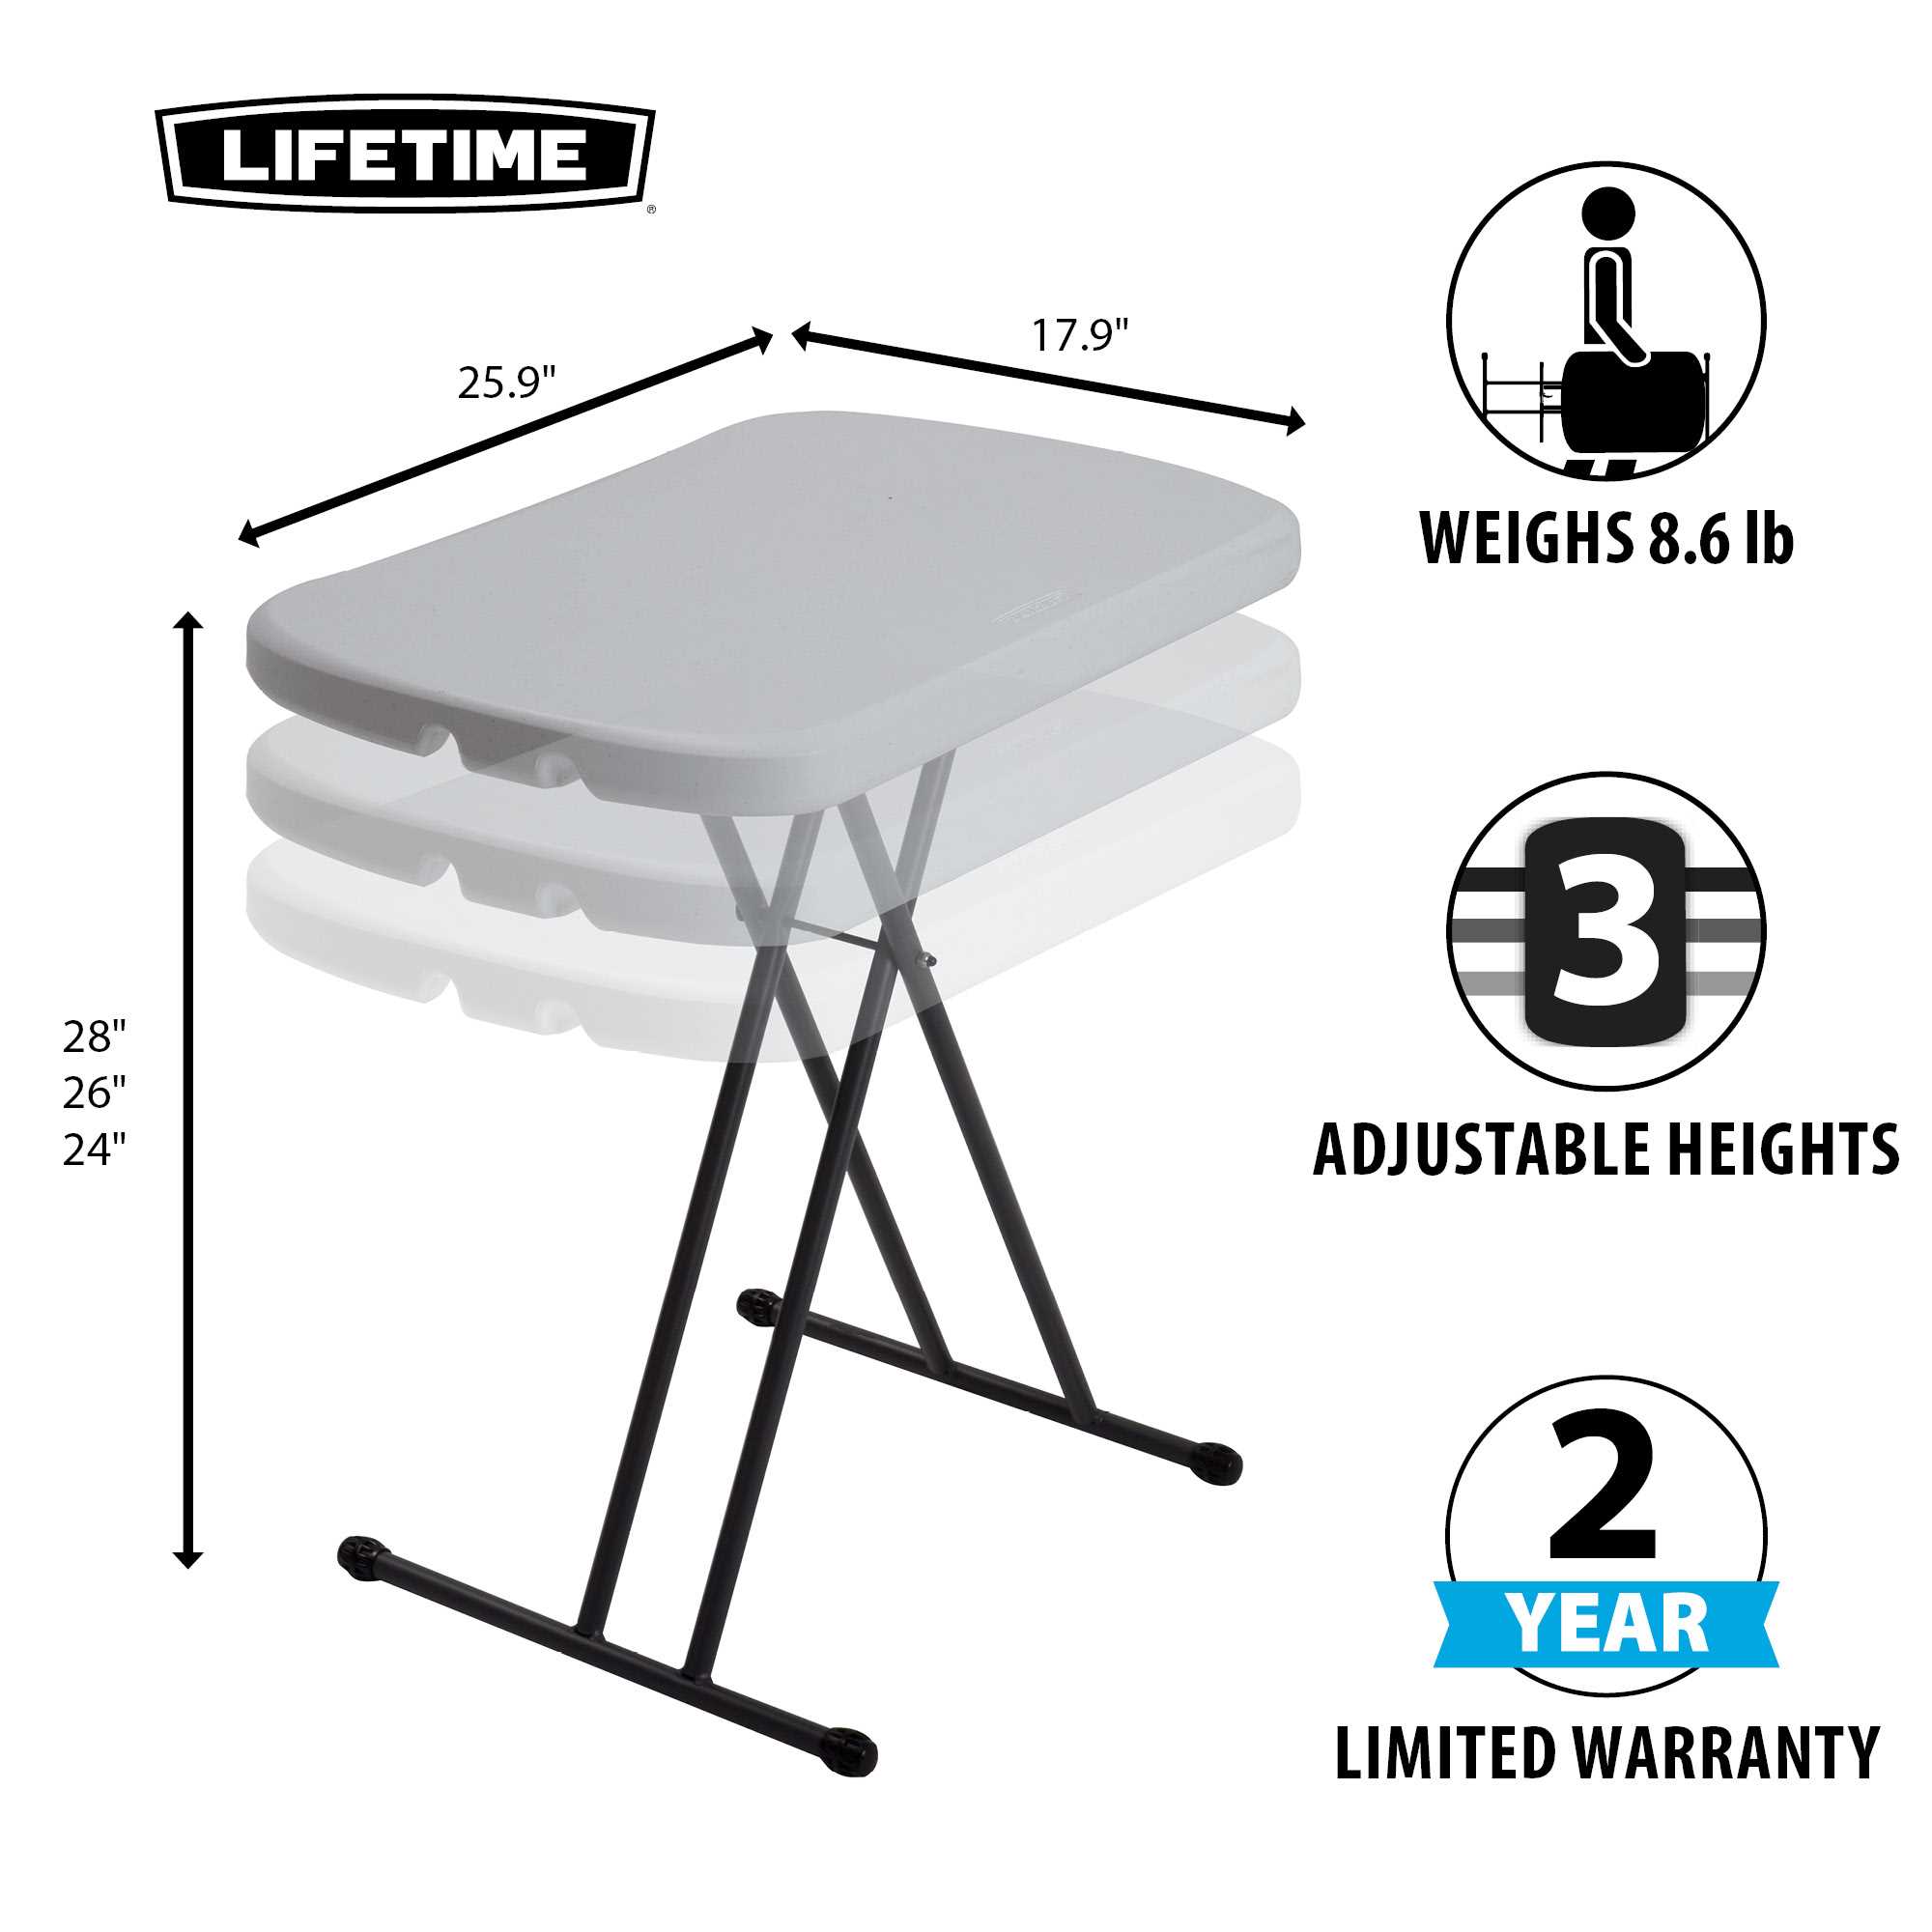 26-inch Personal folding table 66 x 46 cm / 3 height settings / light commercial